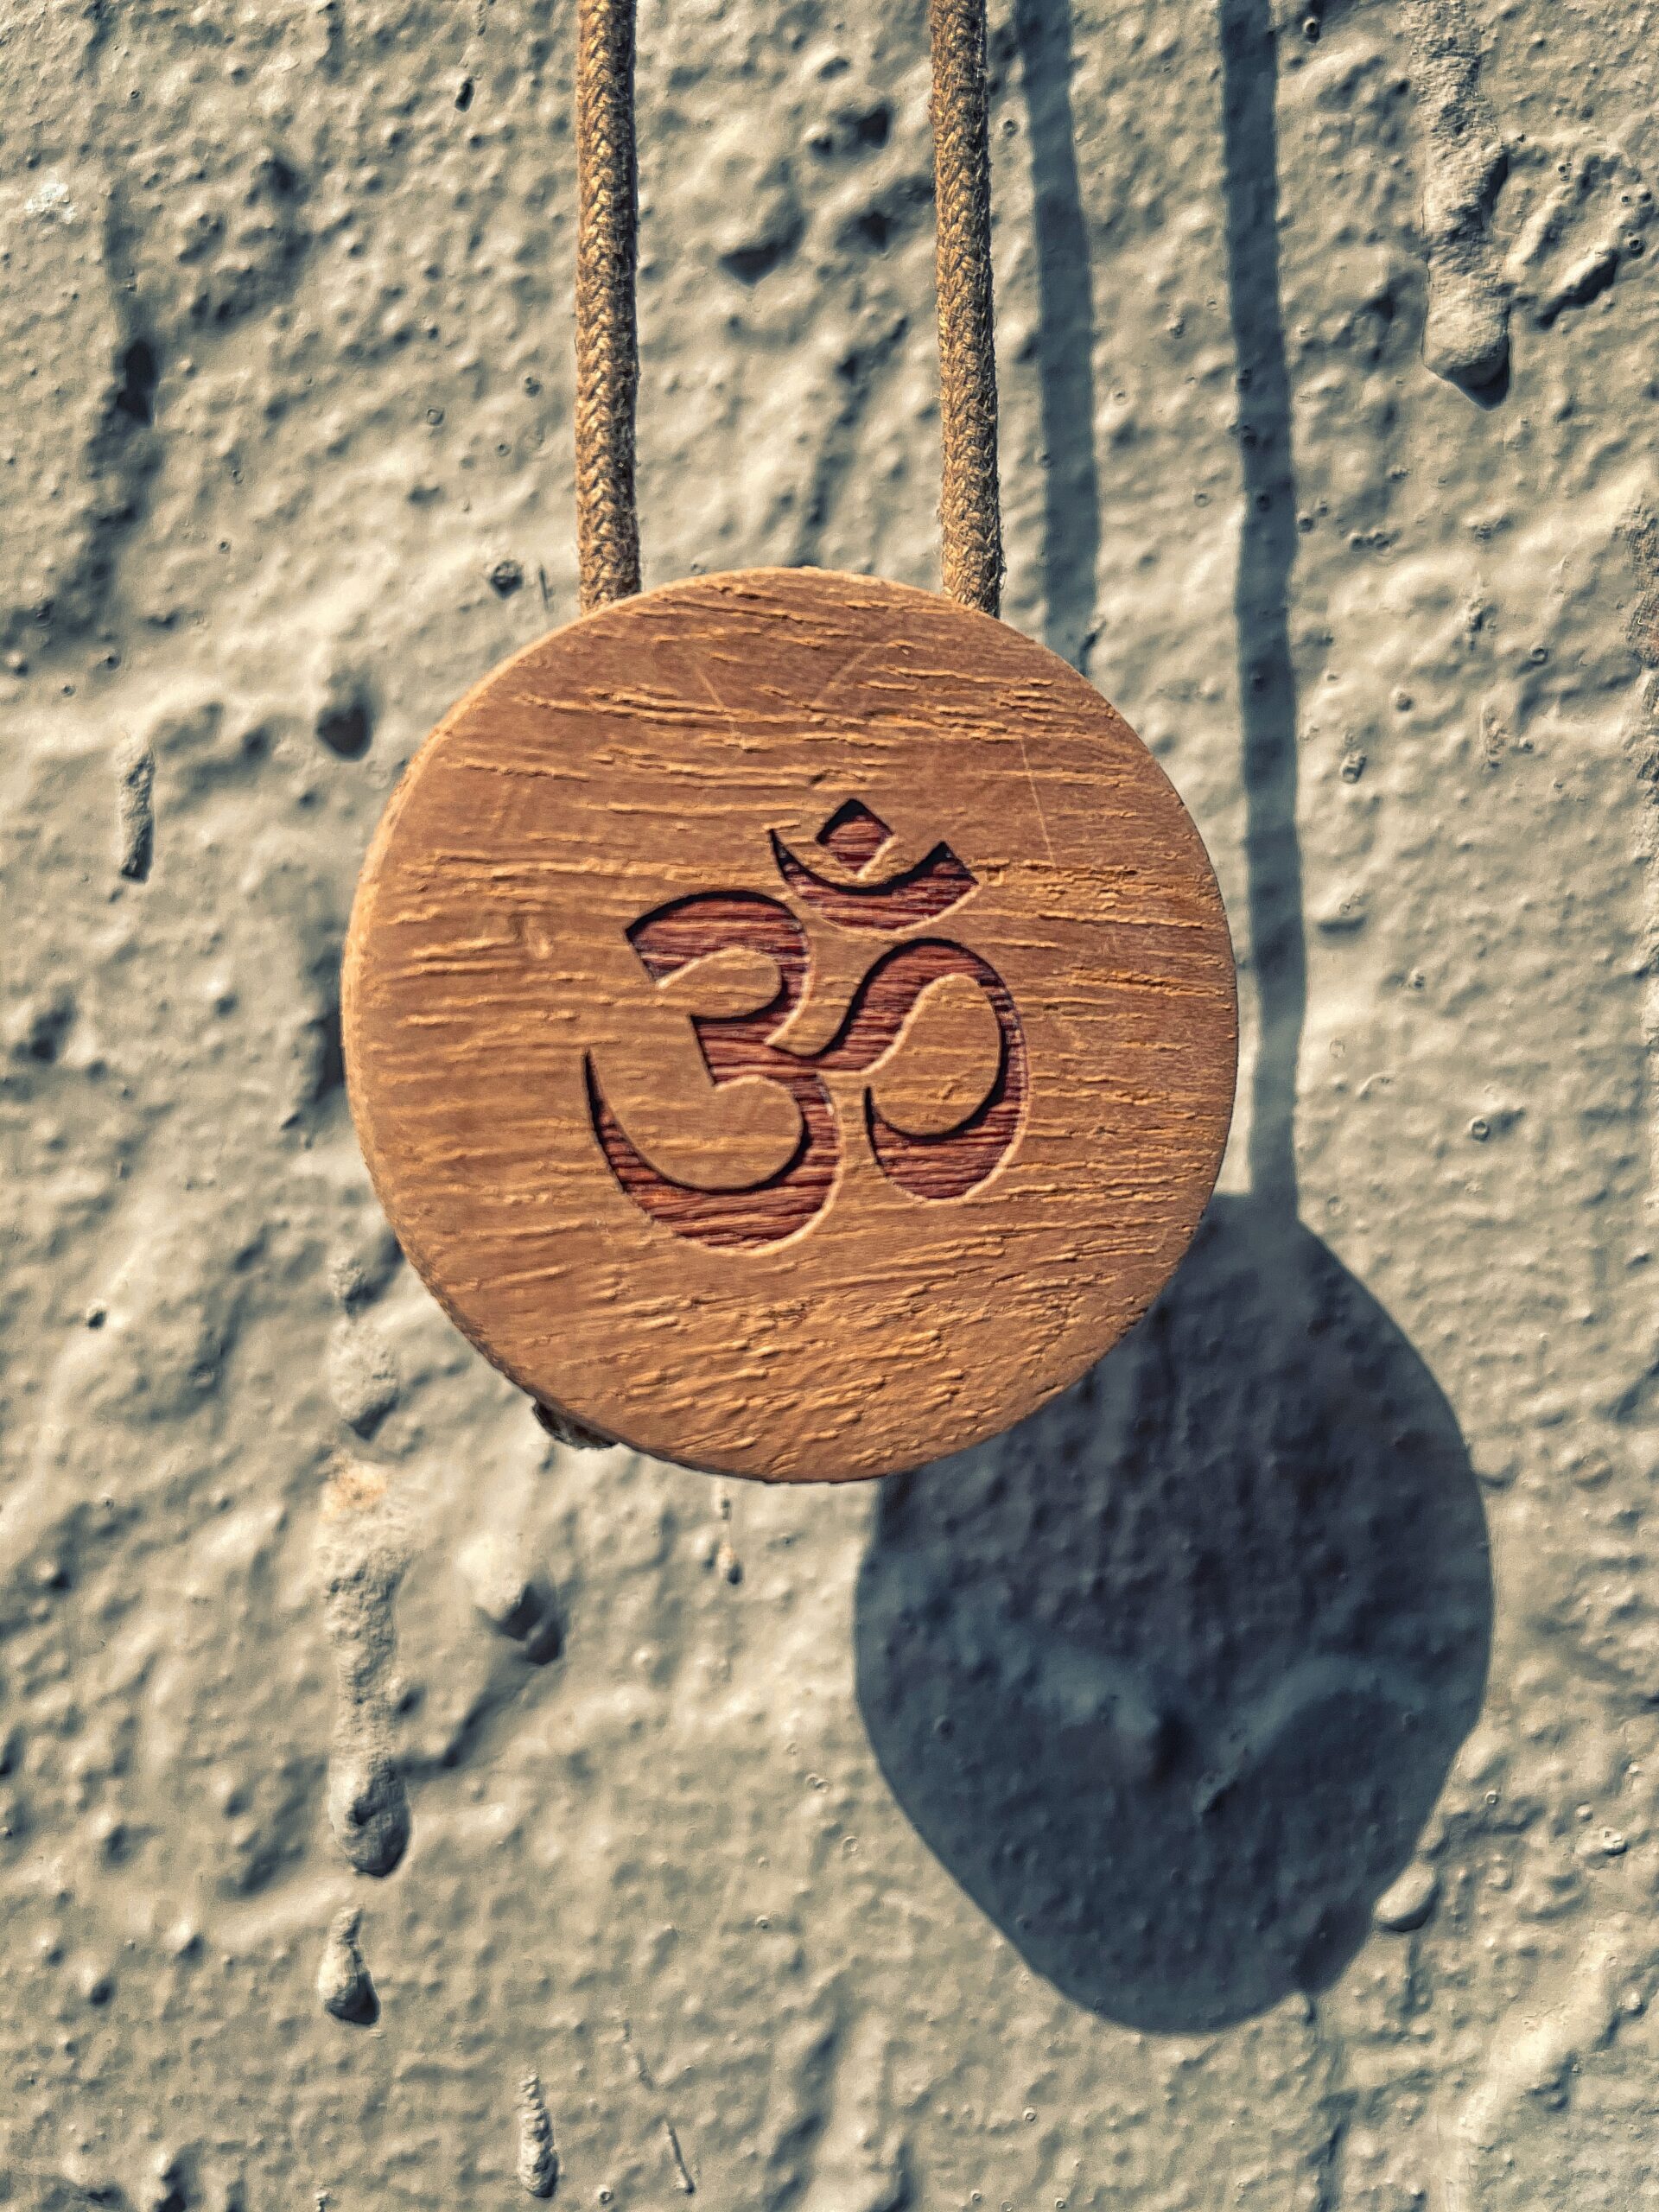 Om, the seed mantra, a sacred syllable